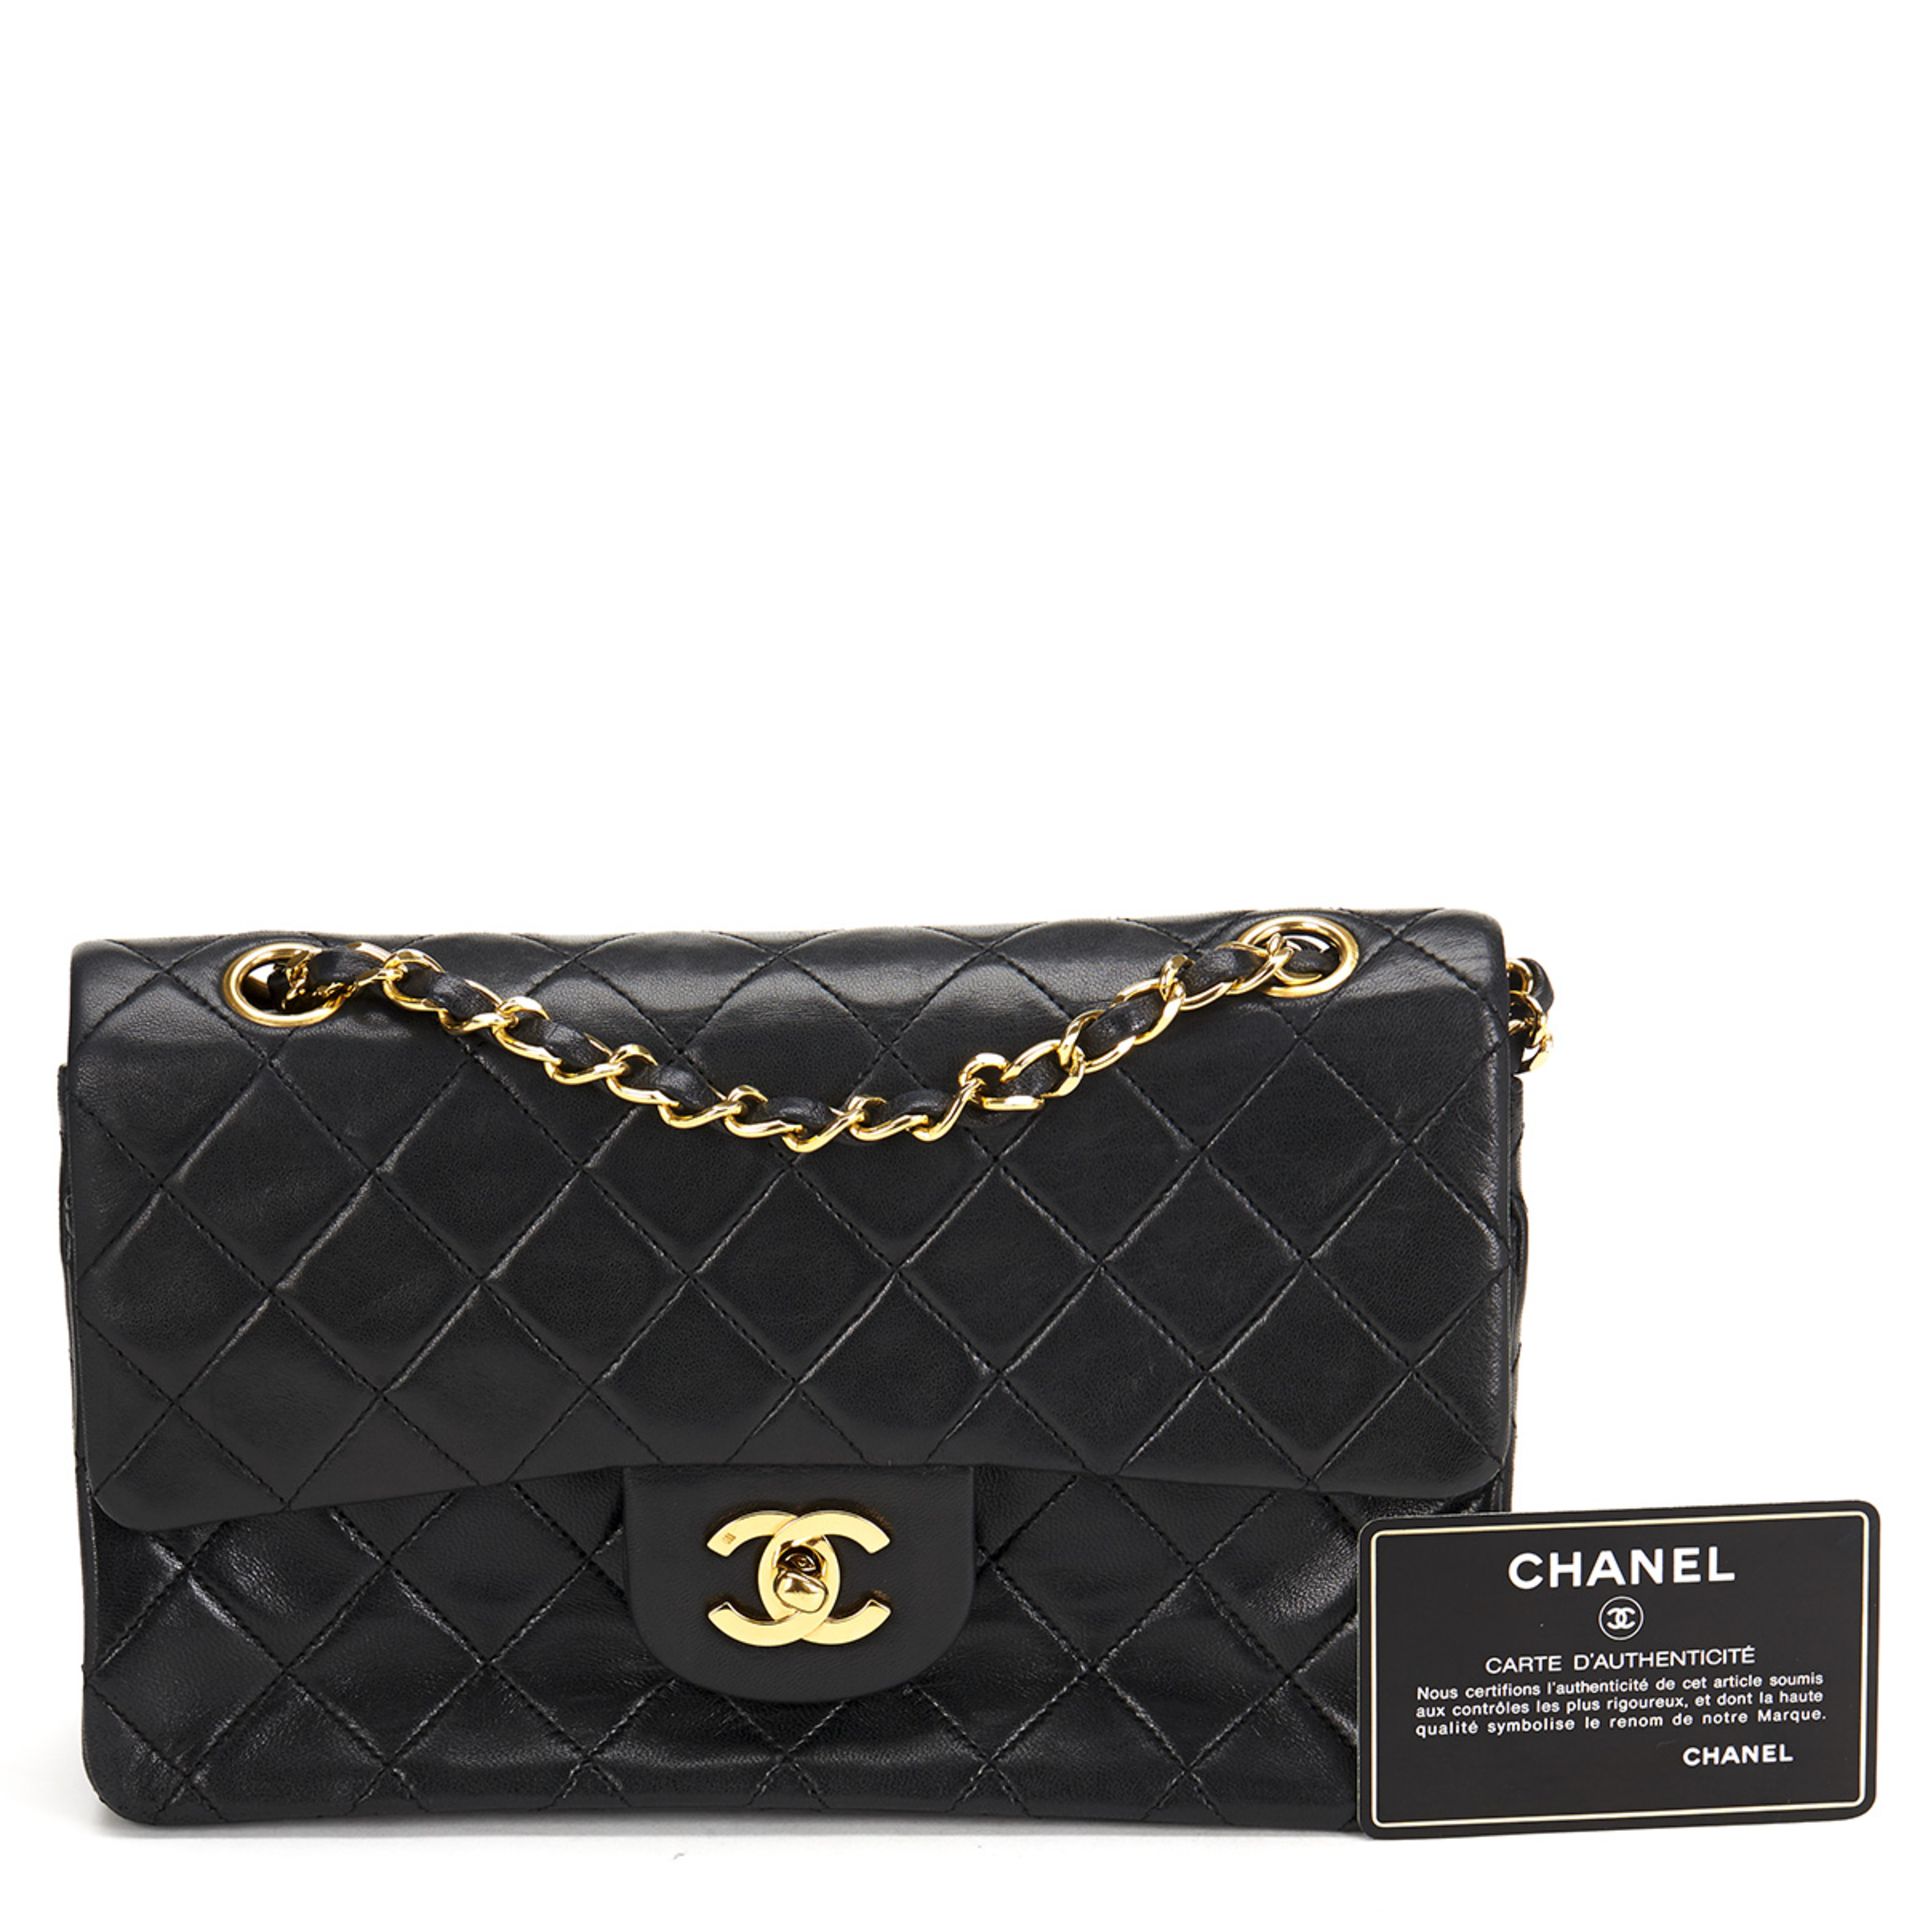 Chanel, Small Classic Double Flap Bag - Image 10 of 10